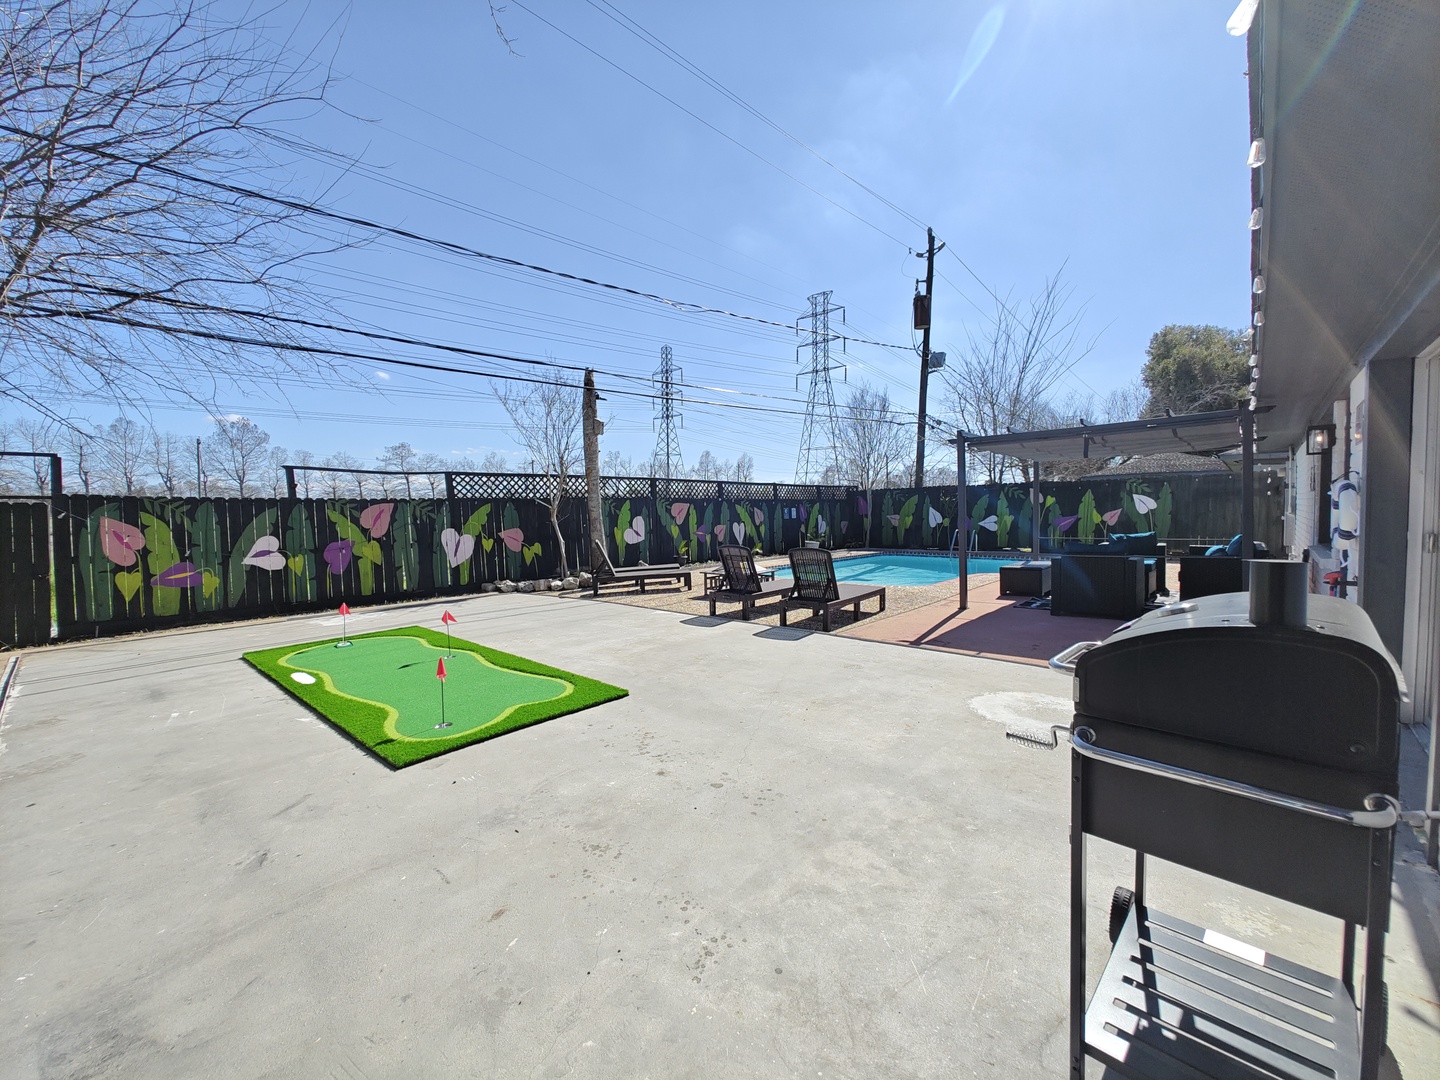 Practice your putt out back or make a splash in the sparkling pool!